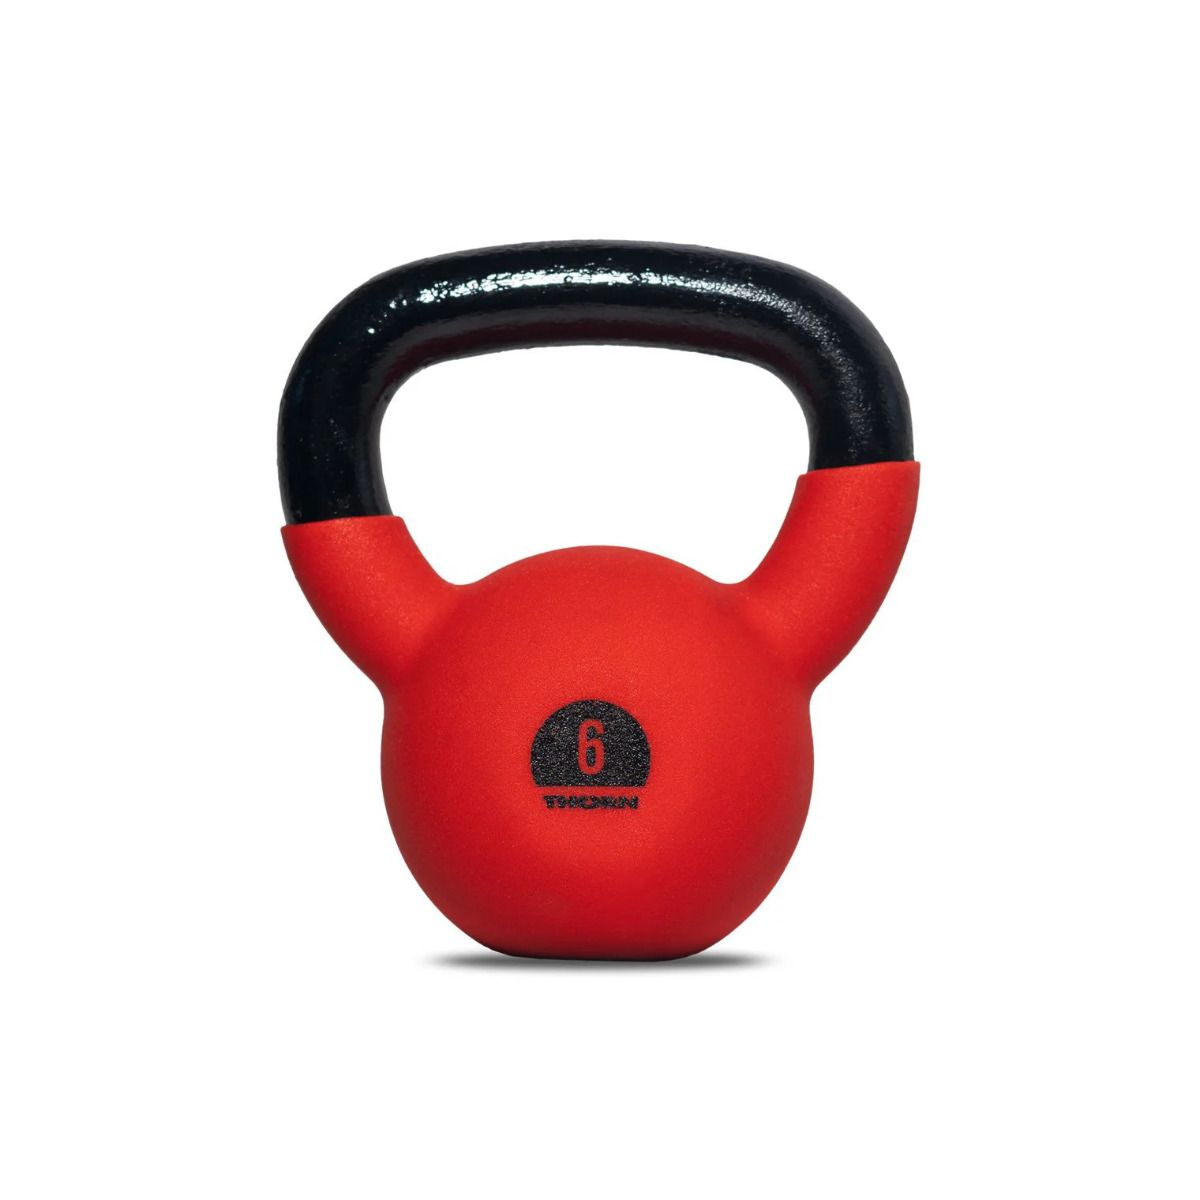 THORN FIT Kugelhantel Cast-iron with coating Kettlebell 6kg